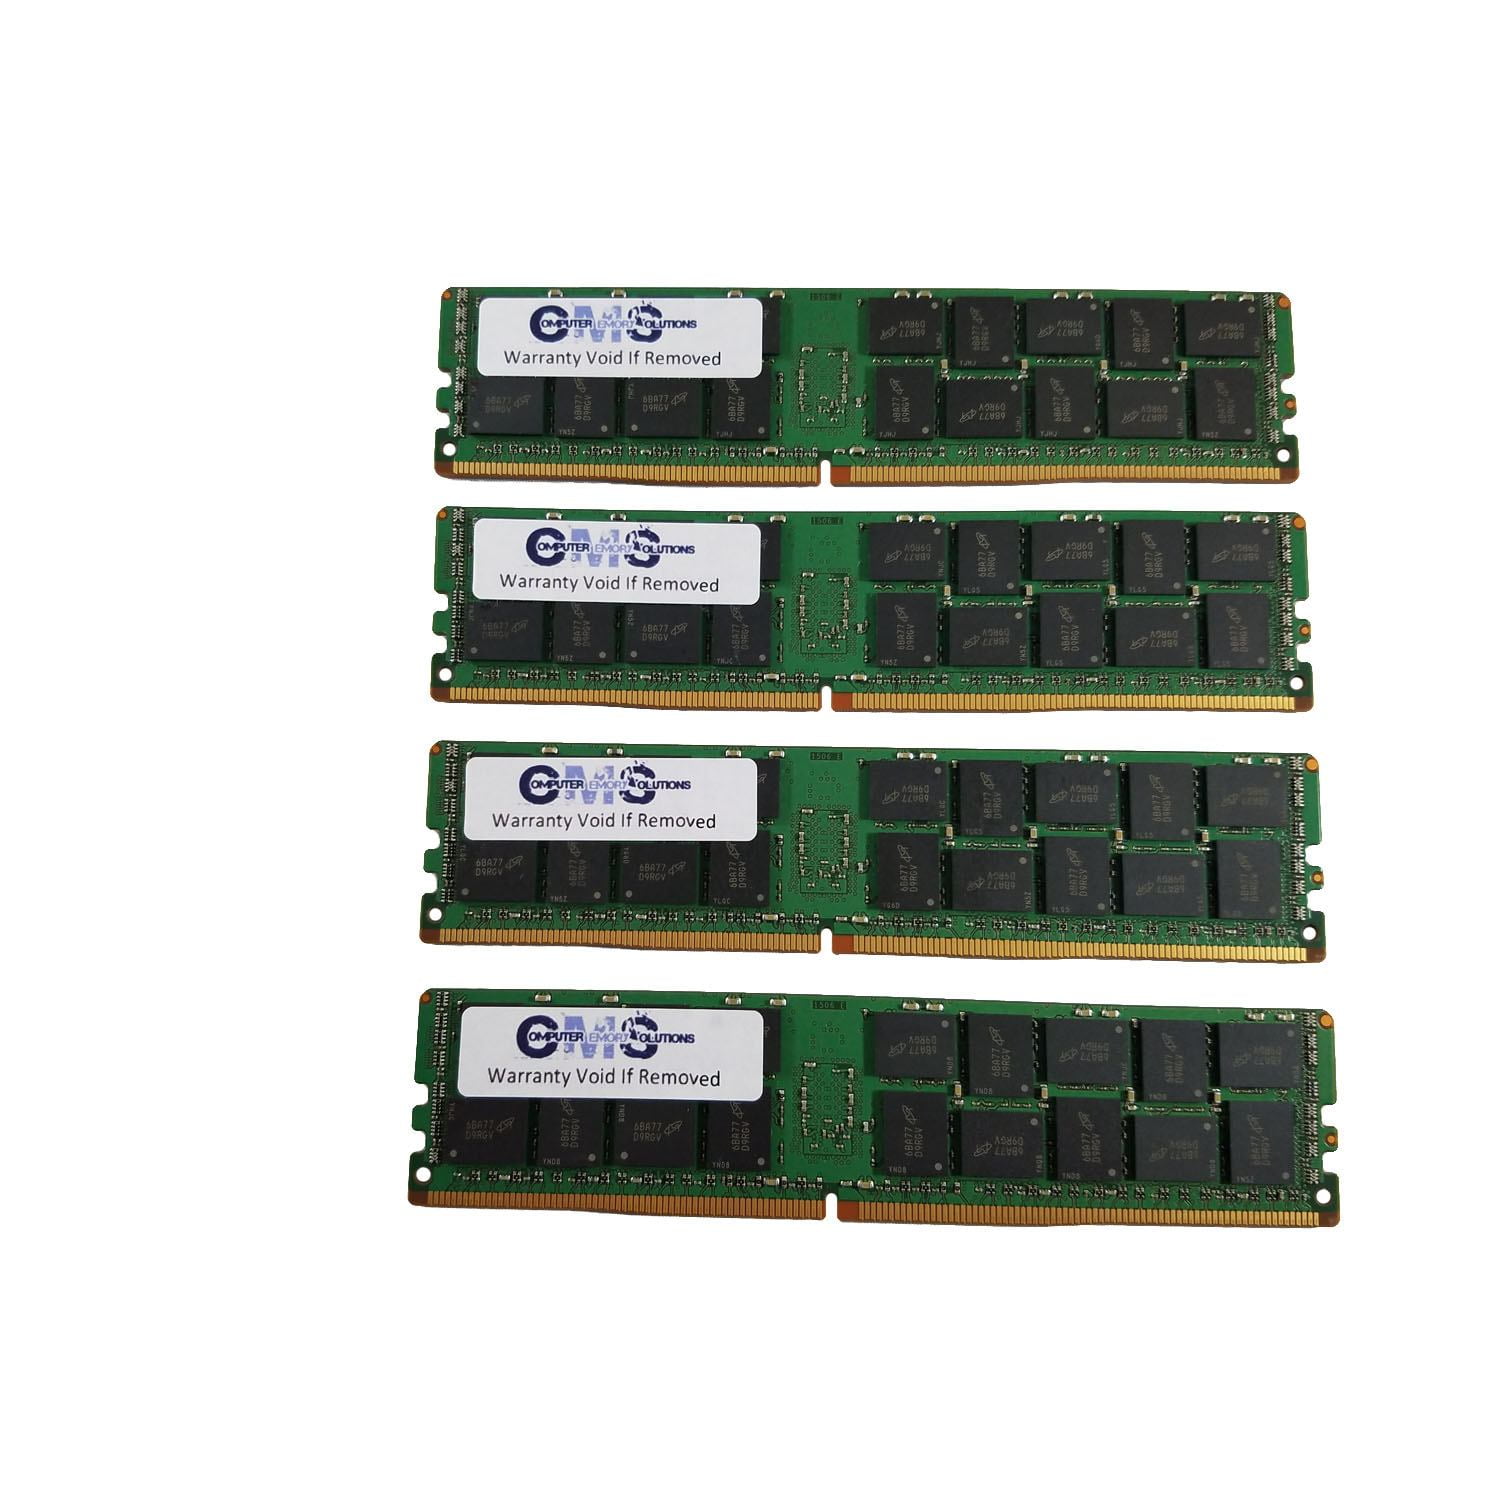 Z10PR-D16 only by CMS D16 Memory Ram Compatible with ASUS/ASmobile RS400 E8-PS2 Server E8-PS2-F Server Z10PR-D16 2X32GB 64GB 